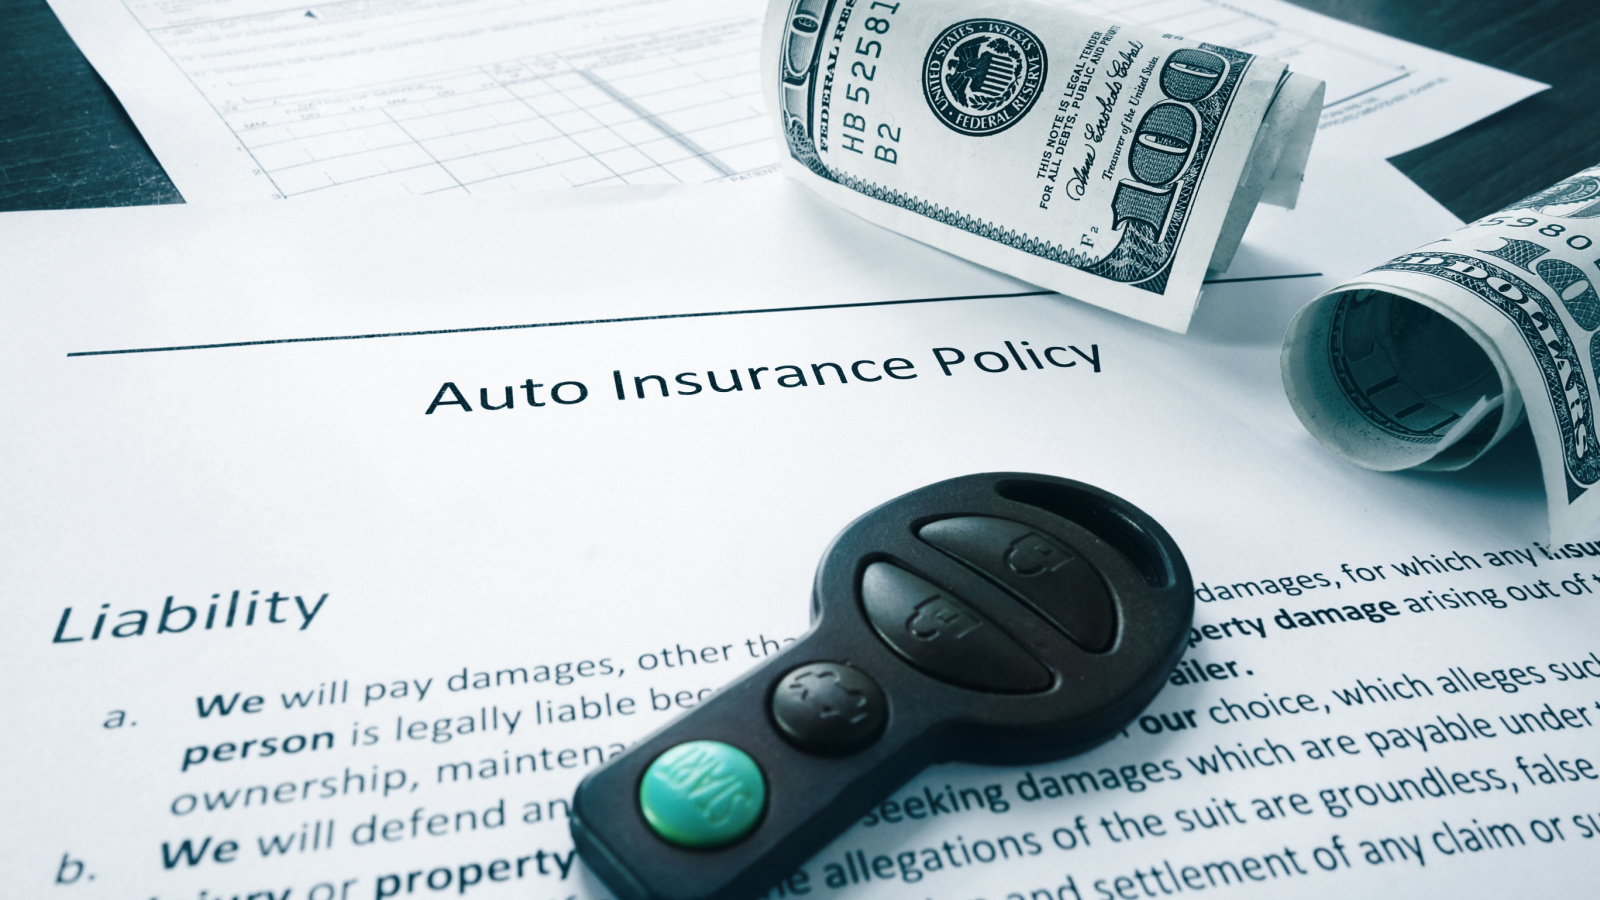 100,000 Policy Limits Settlement | Missouri and Illinois Auto Accident Law Firm | Car Accident Lawyers in St. Louis